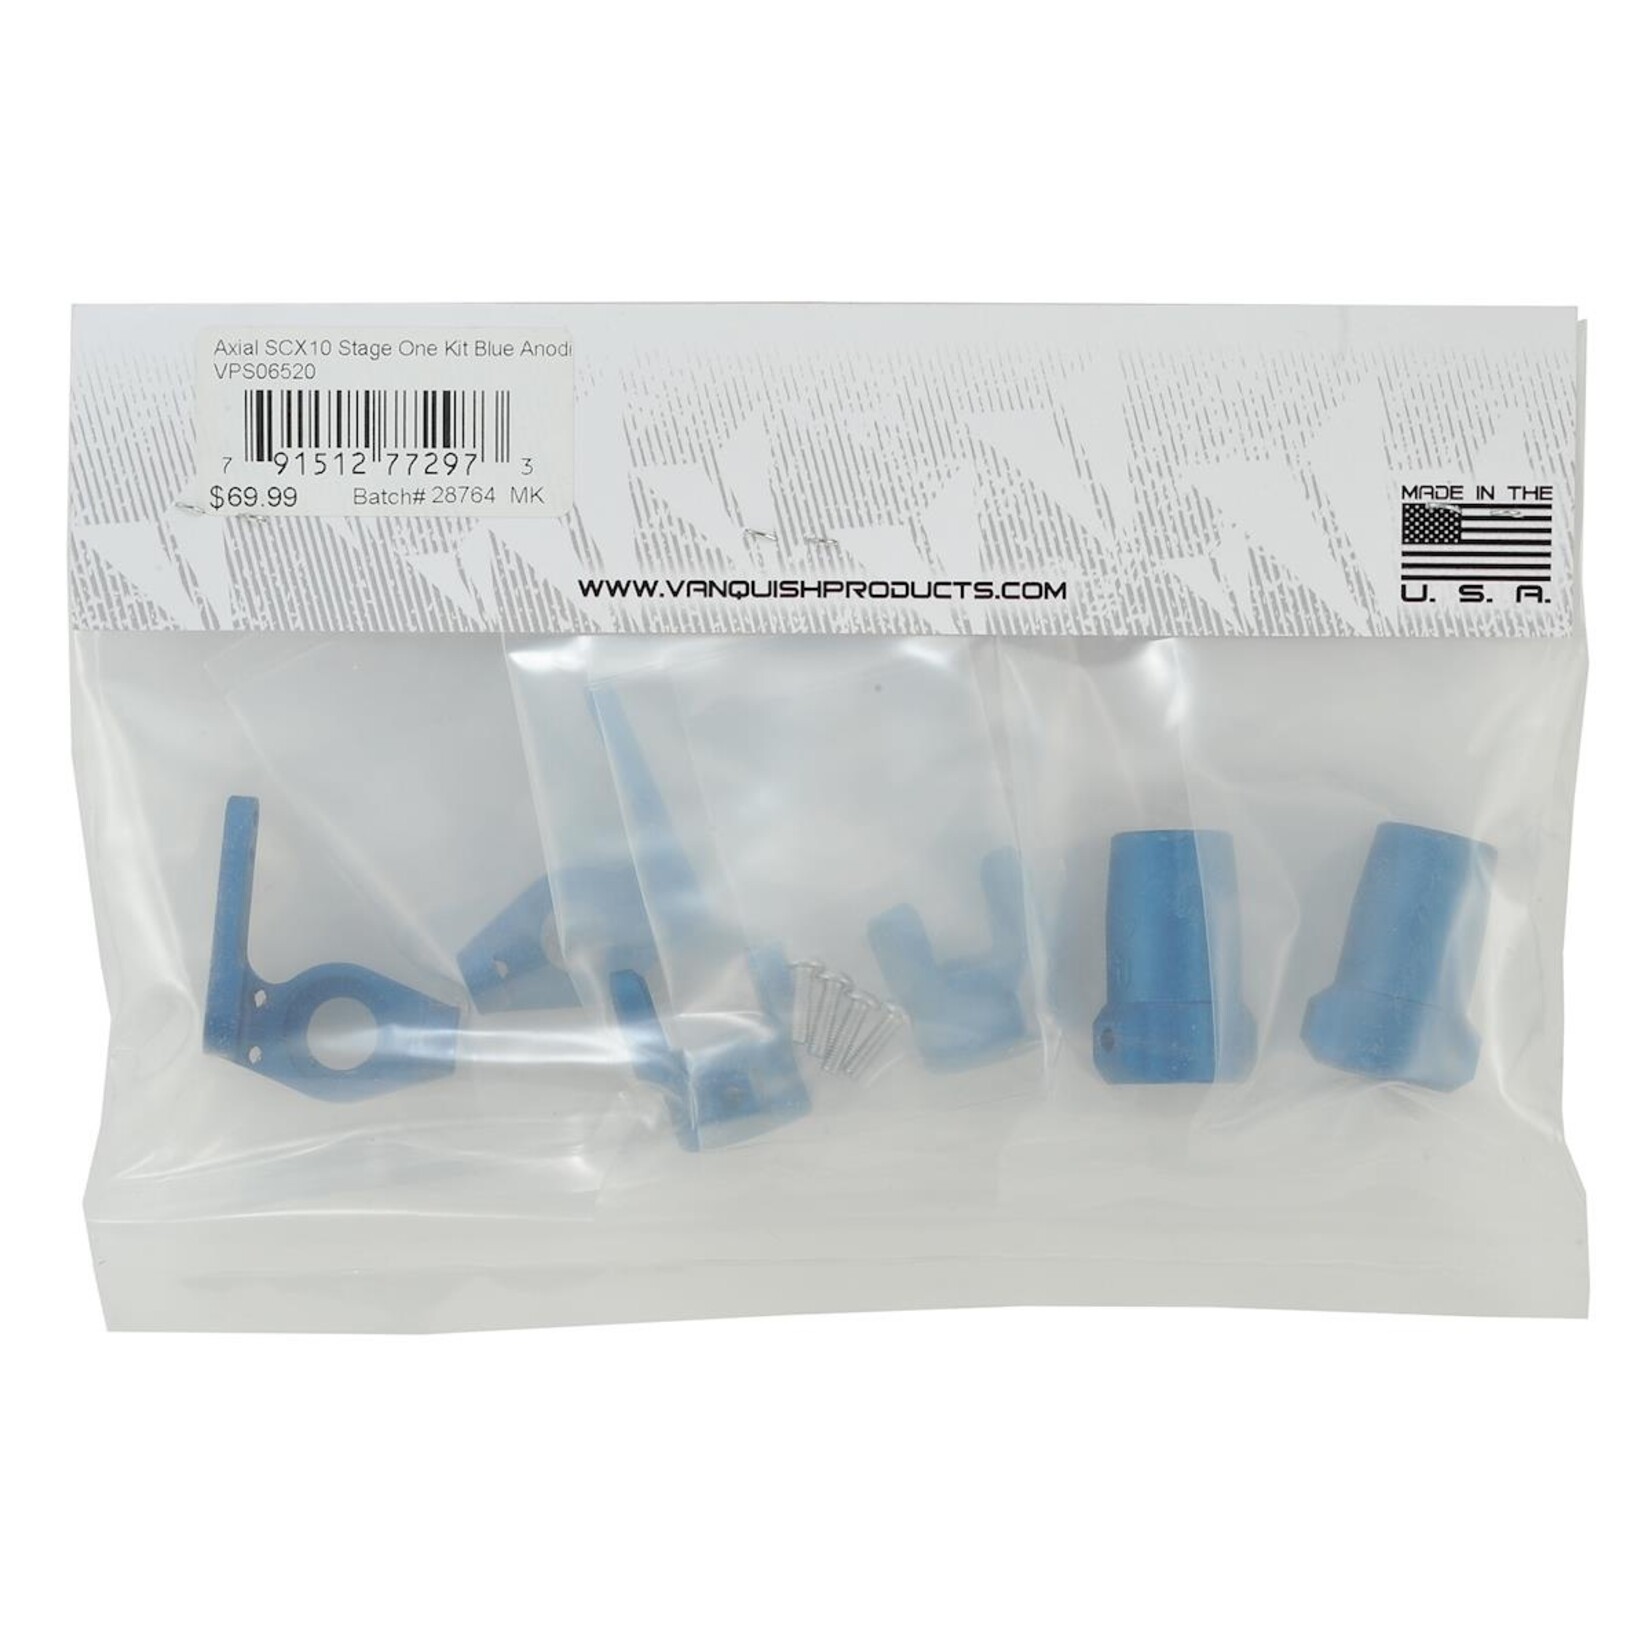 Vanquish Products Vanquish Products SCX10 Stage 1 Kit (Blue) #VPS06520